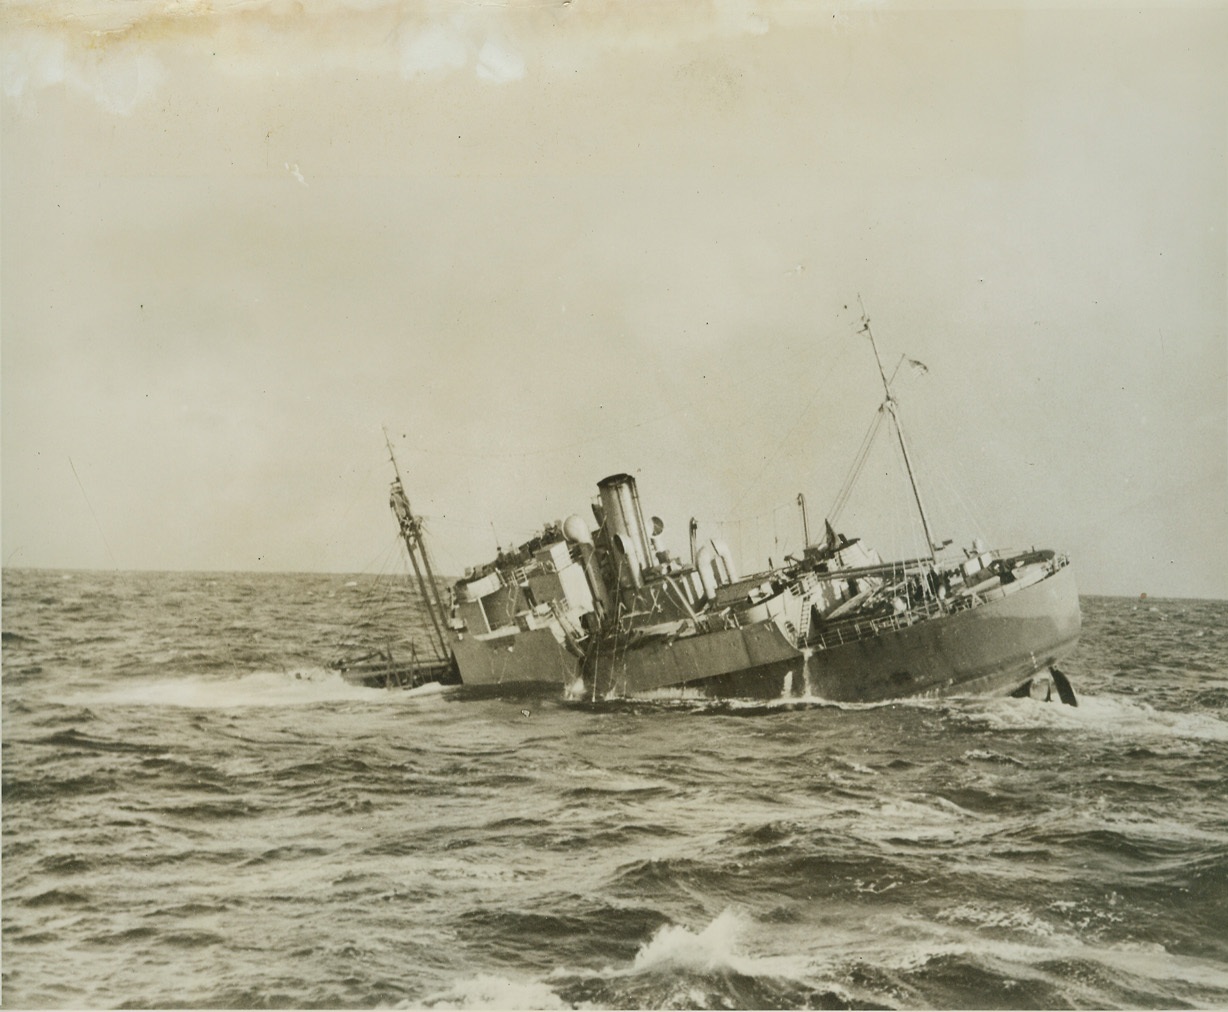 Headed For Davy Jones' Locker, 1/19/1944. NORTH ATLANTIC -- Here is the Army freighter Nevada, pictured during her last few moments from the deck of the Coast Guard Cutter Comanche. The Comanche managed to rescue 29 survivors from the sinking ship which went down during a violent gale off the North Atlantic Coast last month. Thirty-four men were lost, including the Nevada's commanding officer, Captain George P. Turiga of Beacon, N.Y. Credit: (Official Coast Guard Photo - ACME);